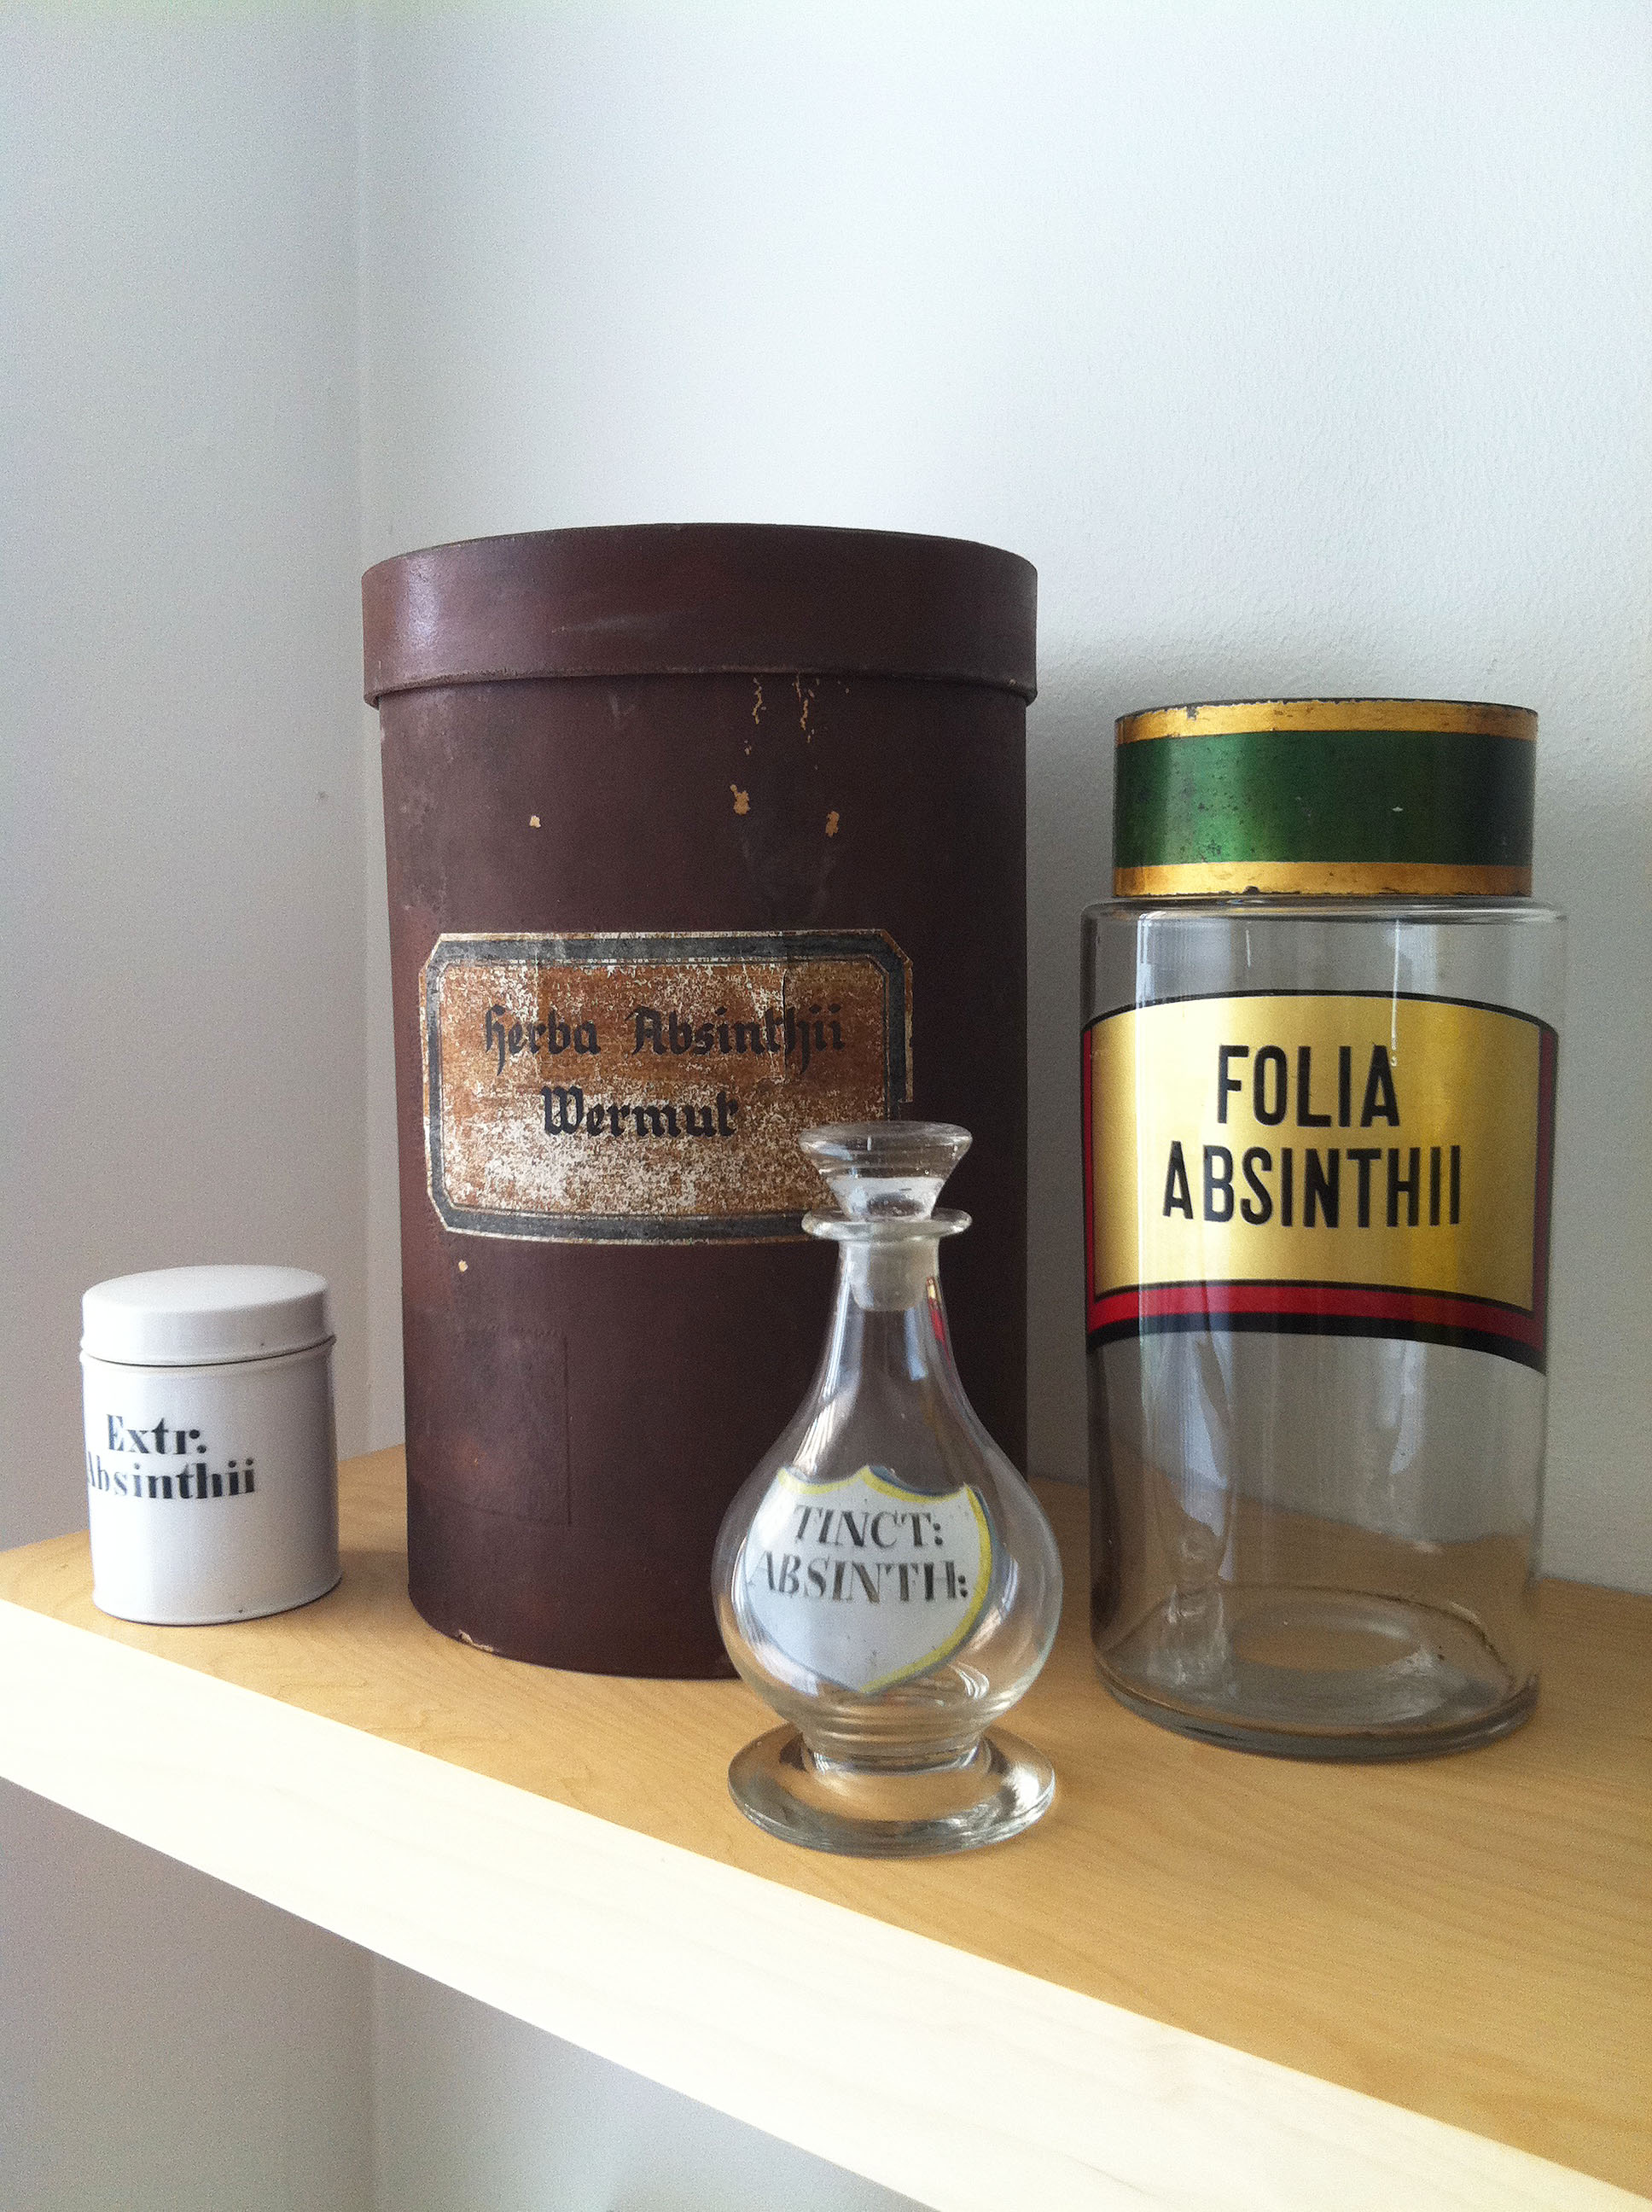 ANTIQUE APOTHECARY JARS - THEFIND